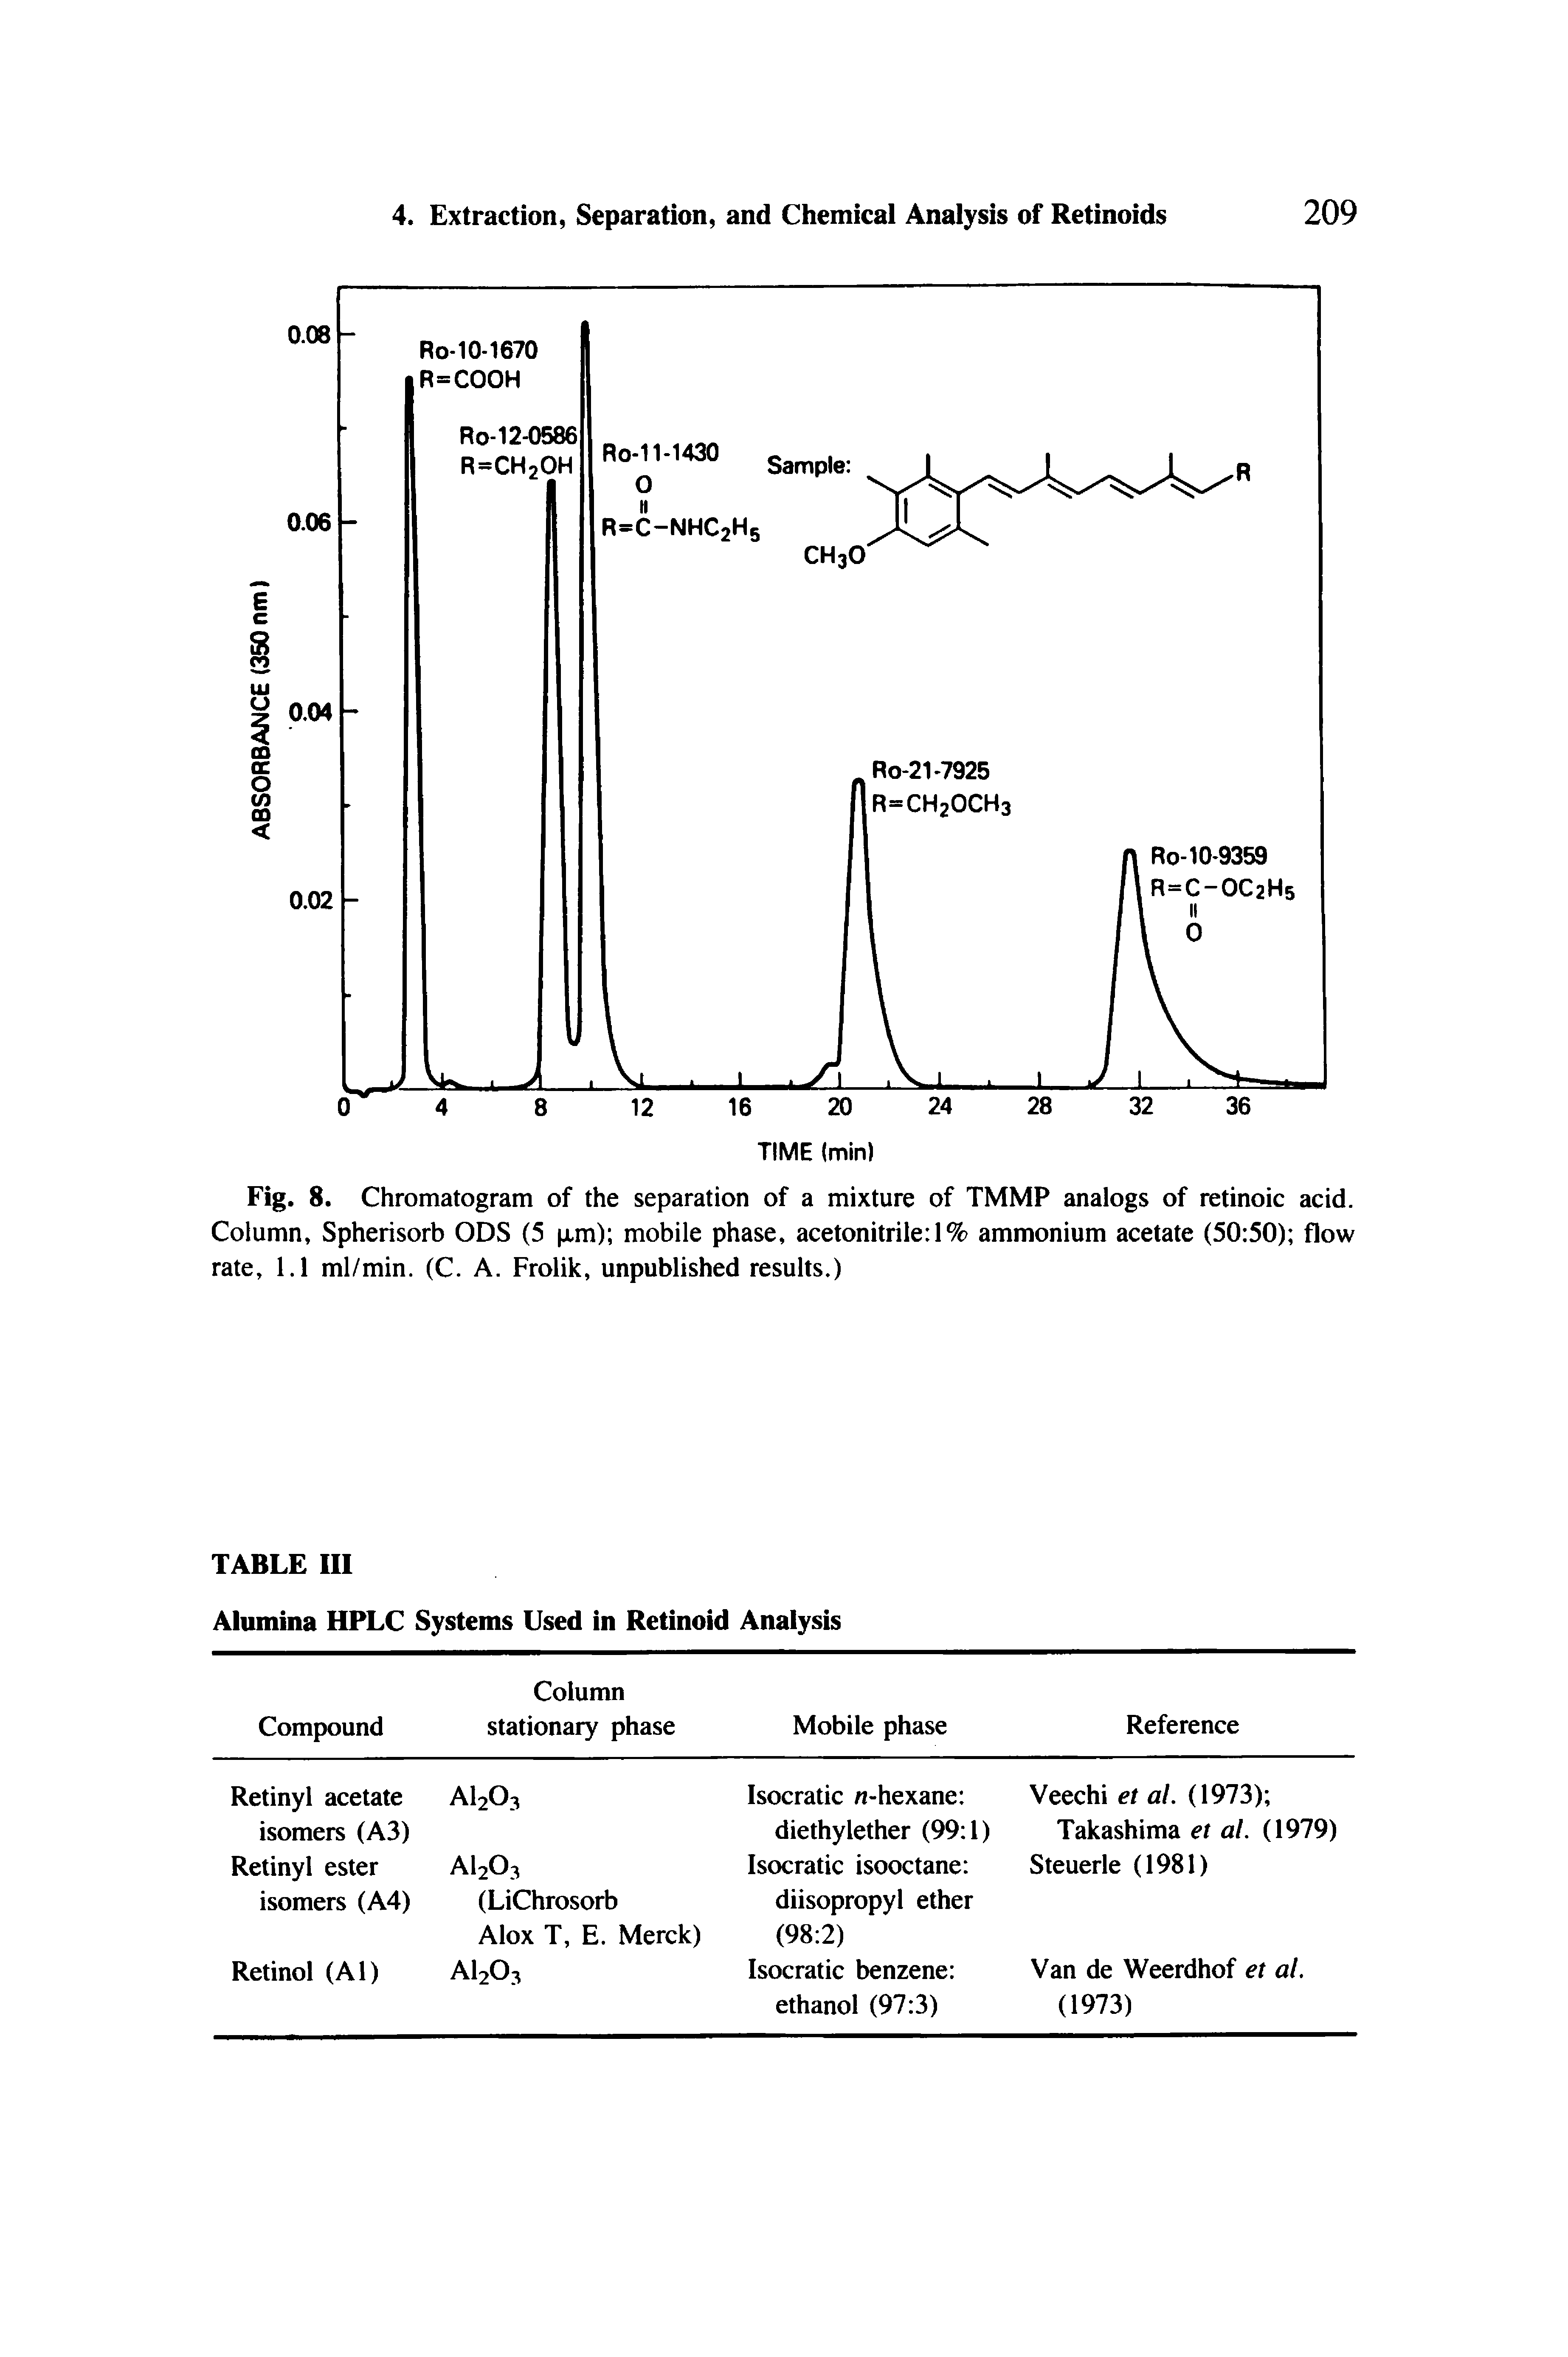 Fig. 8. Chromatogram of the separation of a mixture of TMMP analogs of retinoic acid. Column, Spherisorb ODS (5 xm) mobile phase, acetonitrile 1% ammonium acetate (50 50) flow rate, 1.1 ml/min. (C. A. Frolik, unpublished results.)...